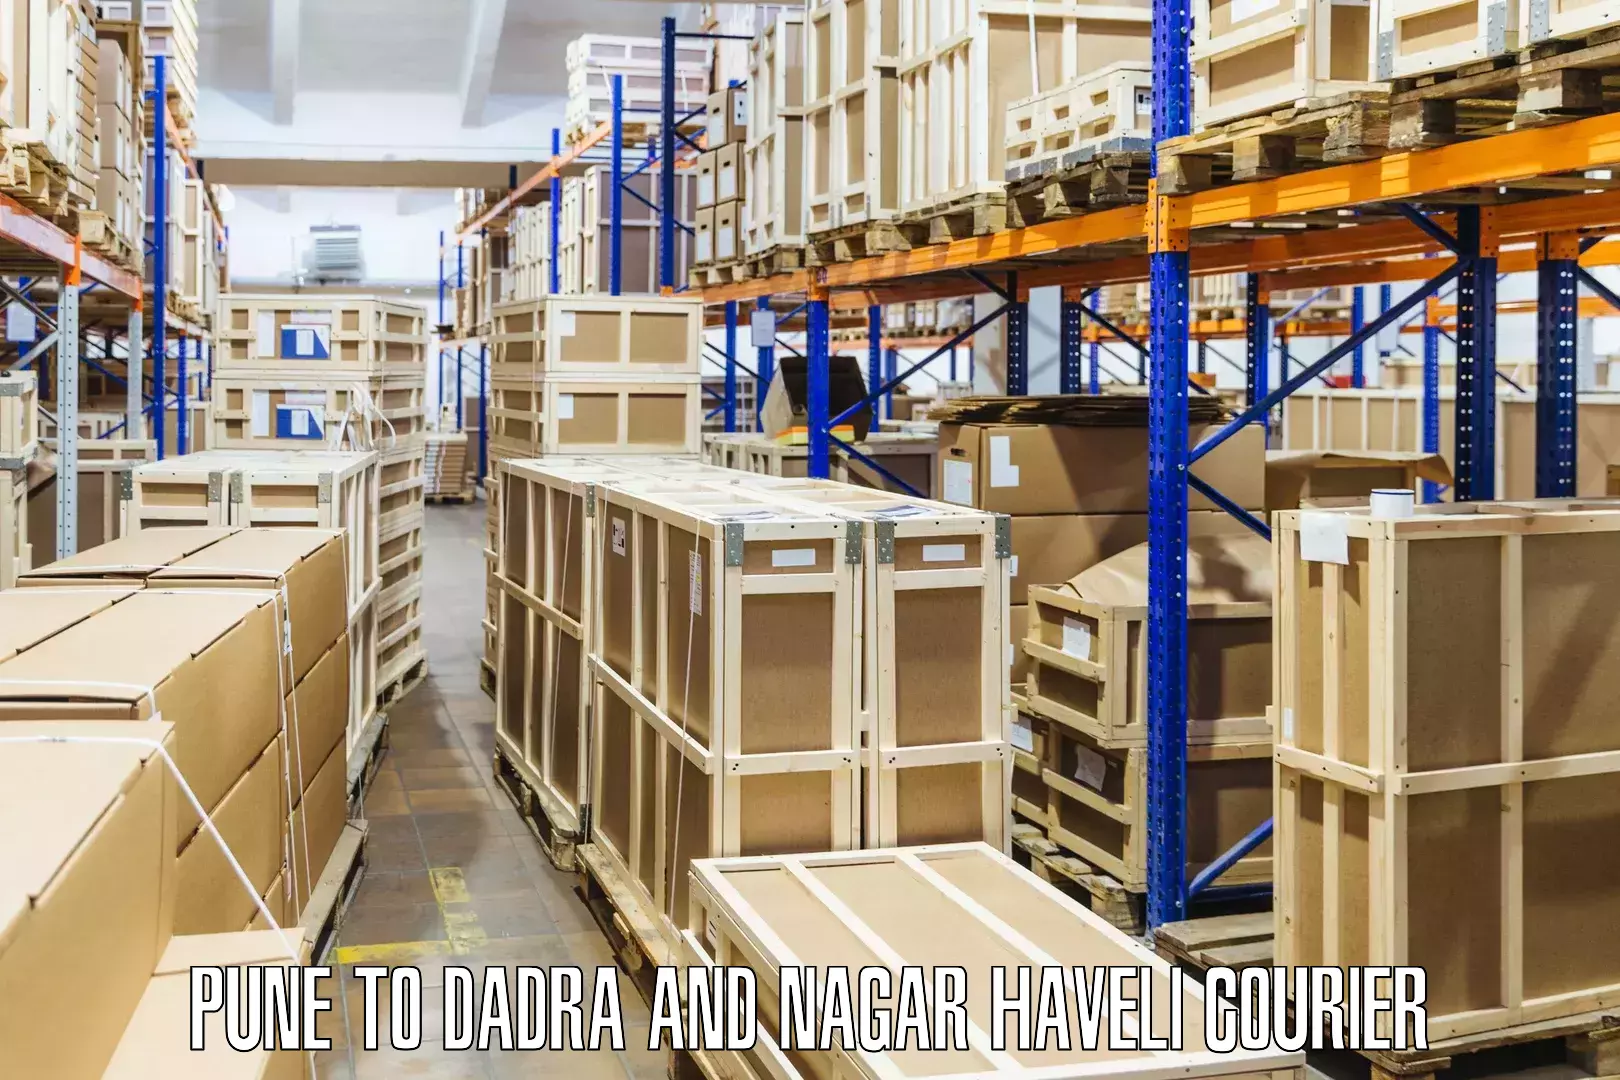 Courier service booking Pune to Dadra and Nagar Haveli